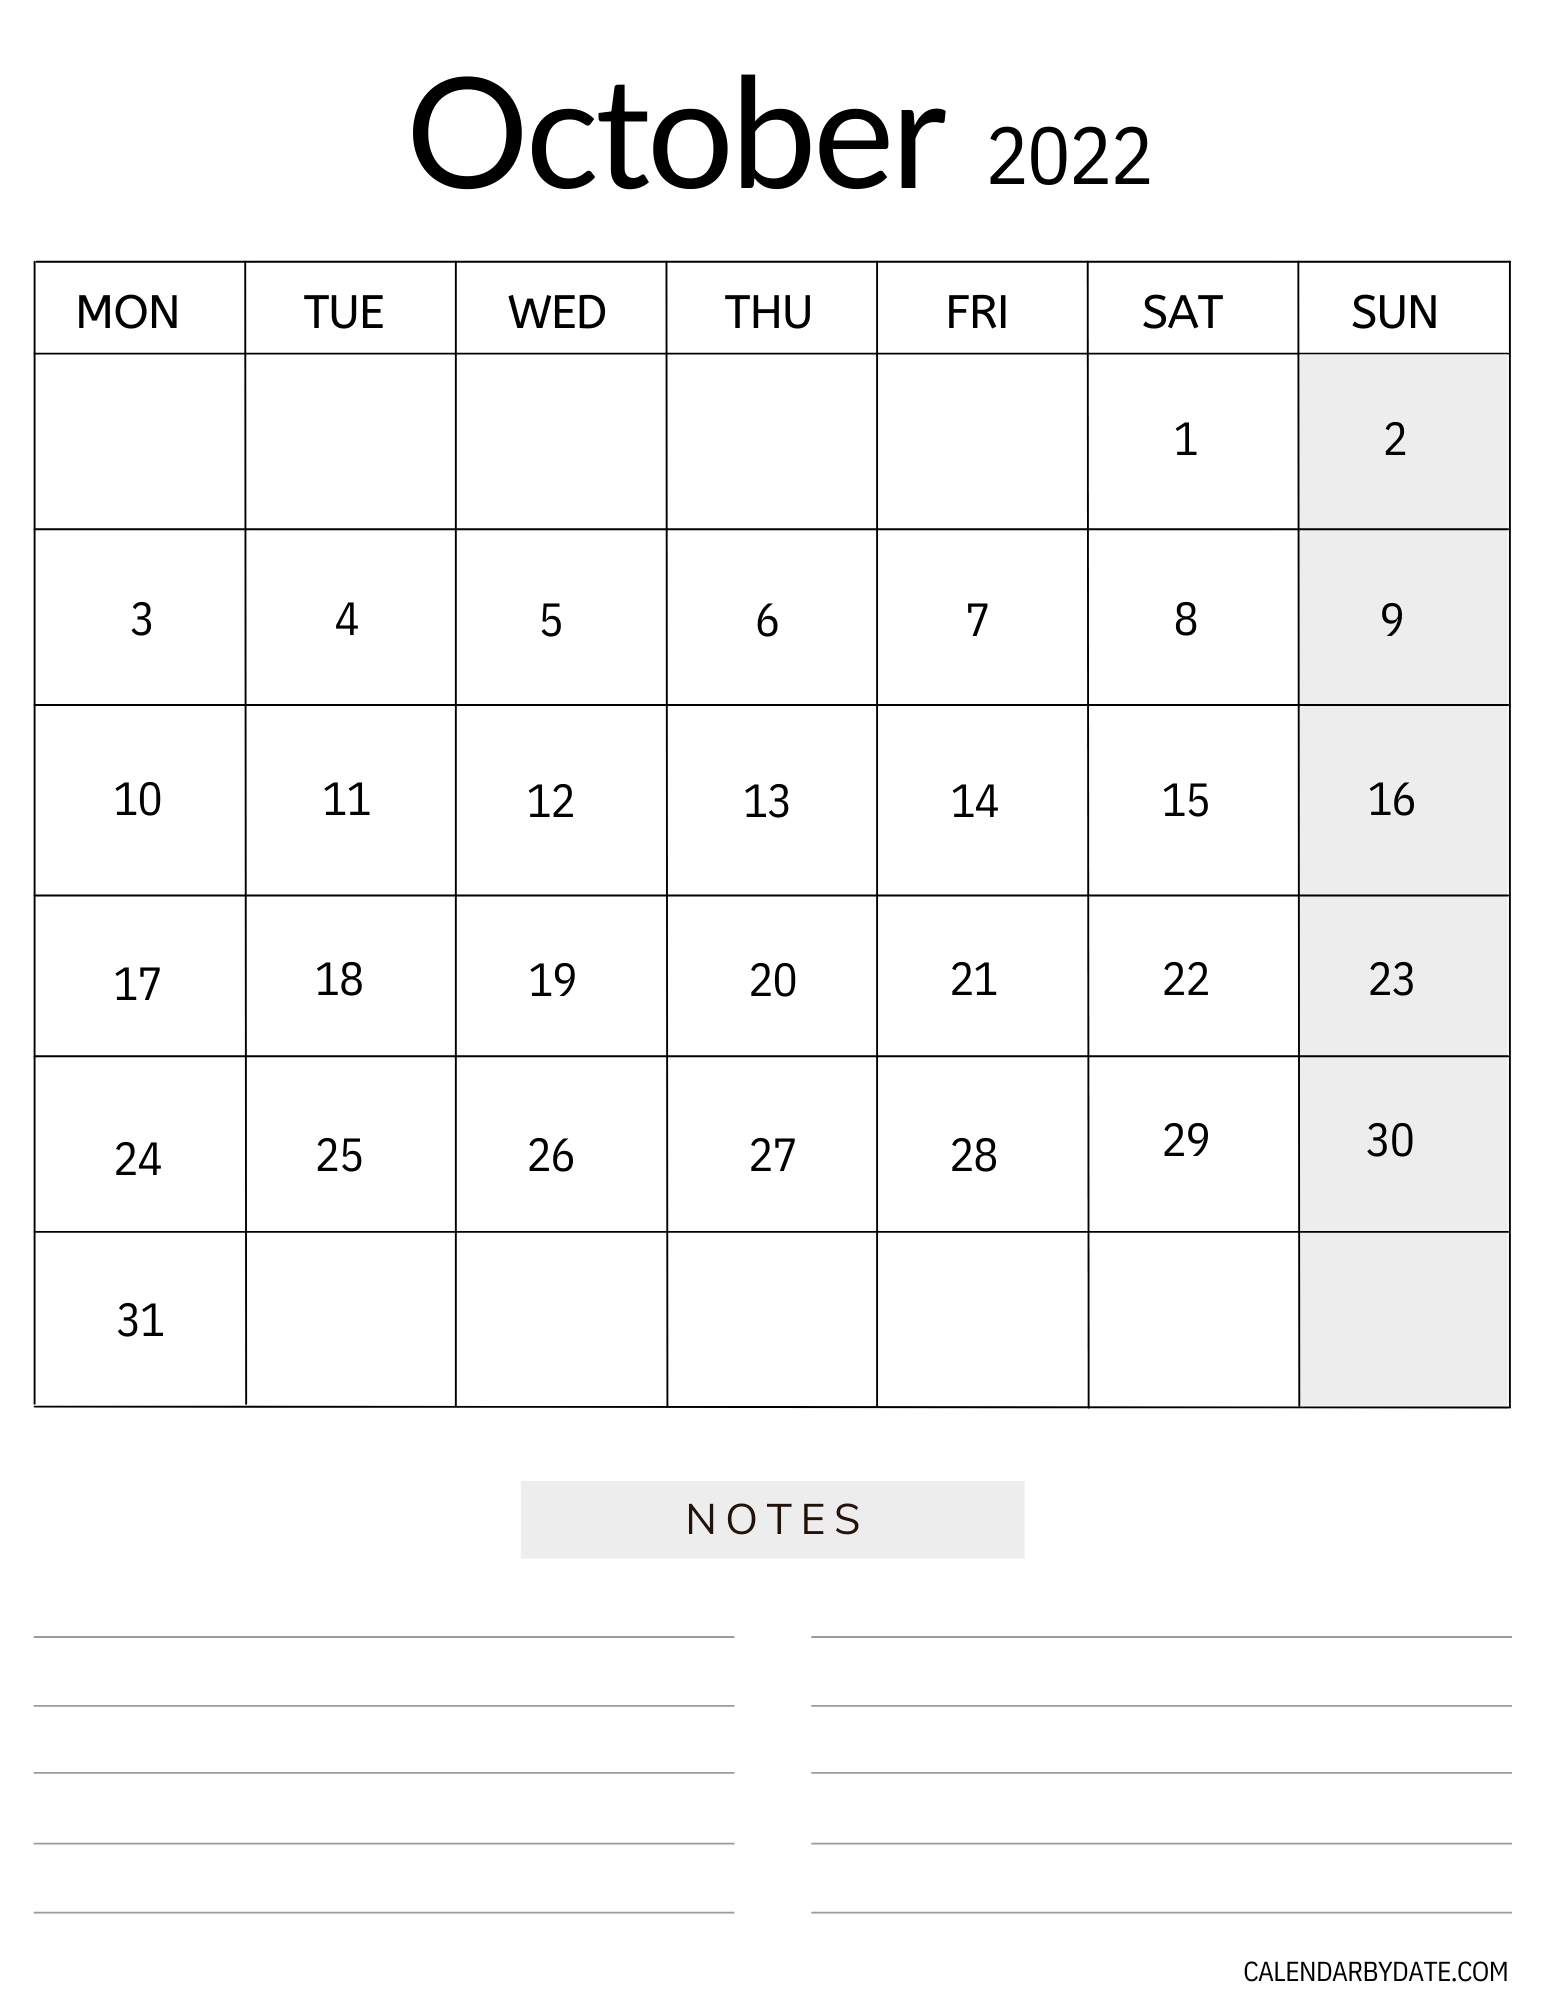 Monthly October 2022 calendar in Portrait layout with separate notes section at the bottom.